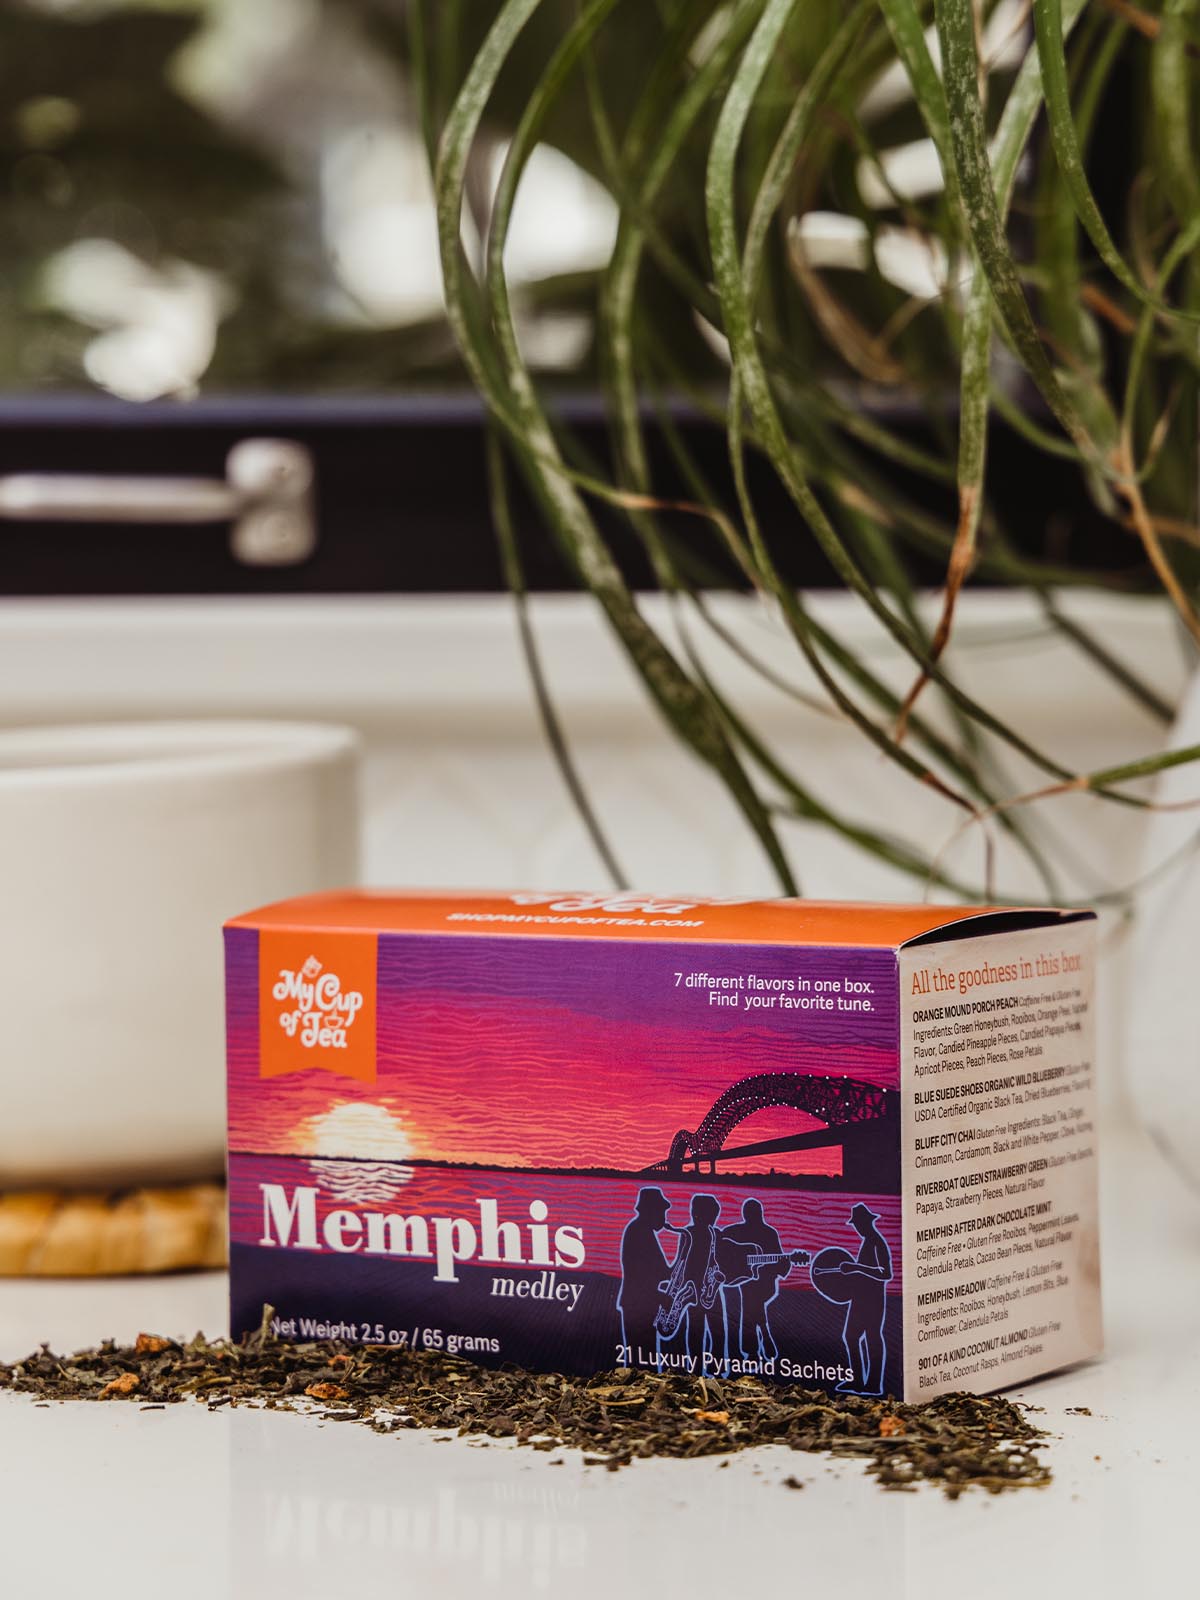 Memphis Medley Tea box on counter with coffee cup and greenery.